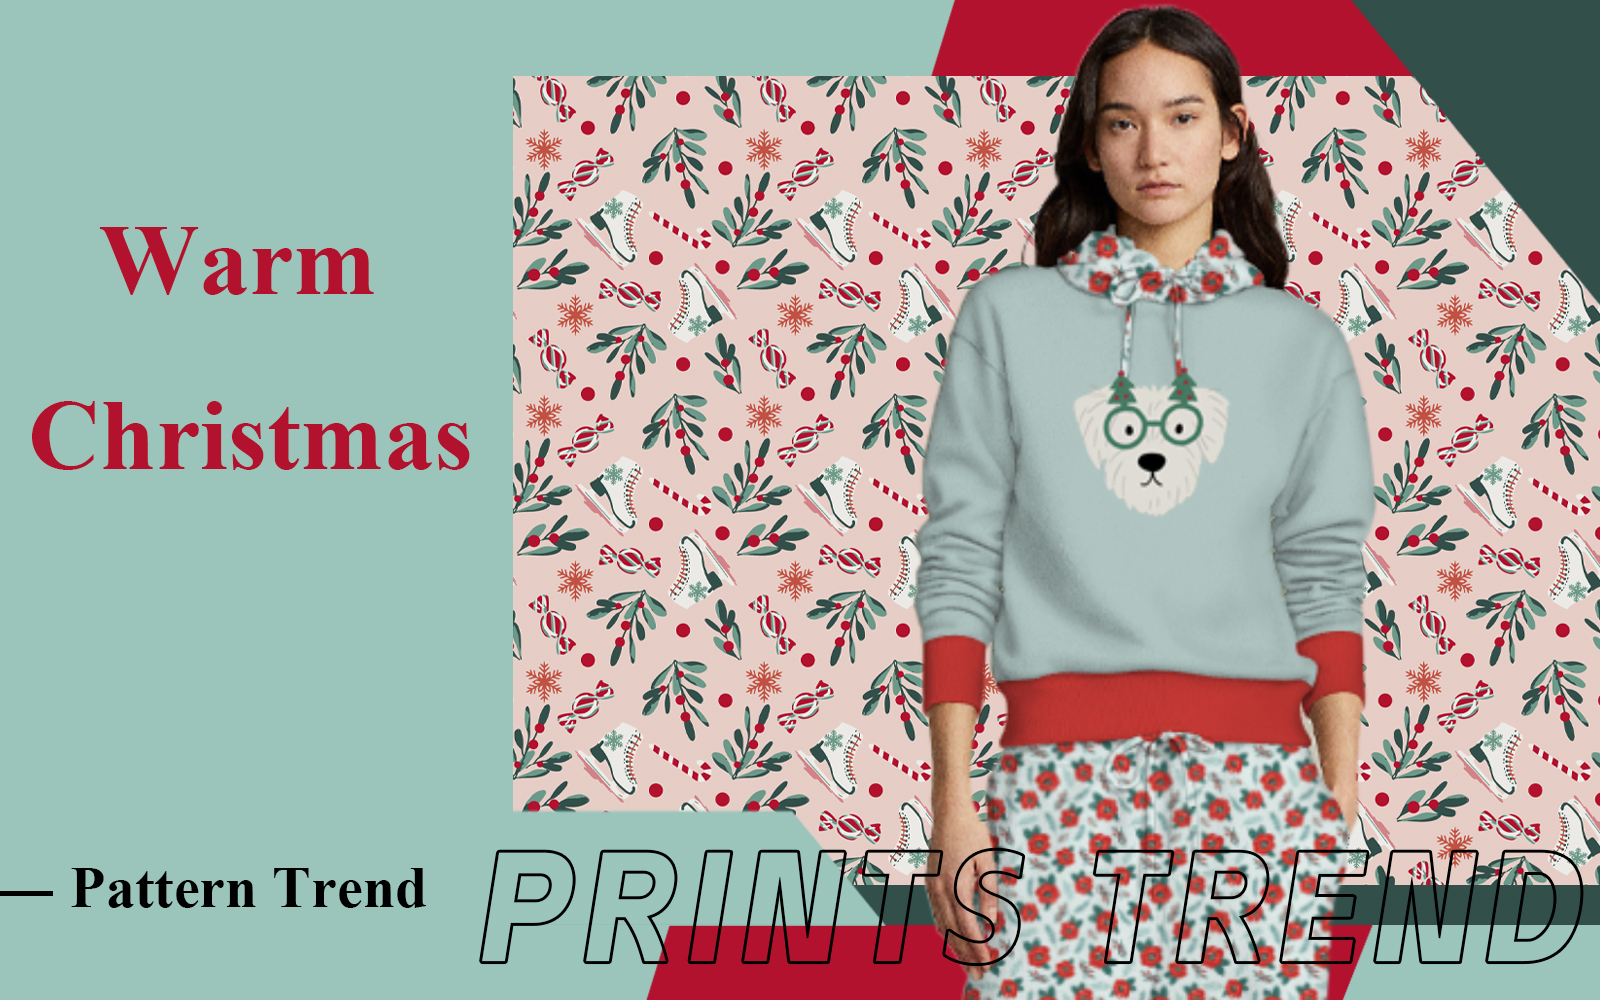 Warm Christmas -- The Pattern Trend for Womenswear